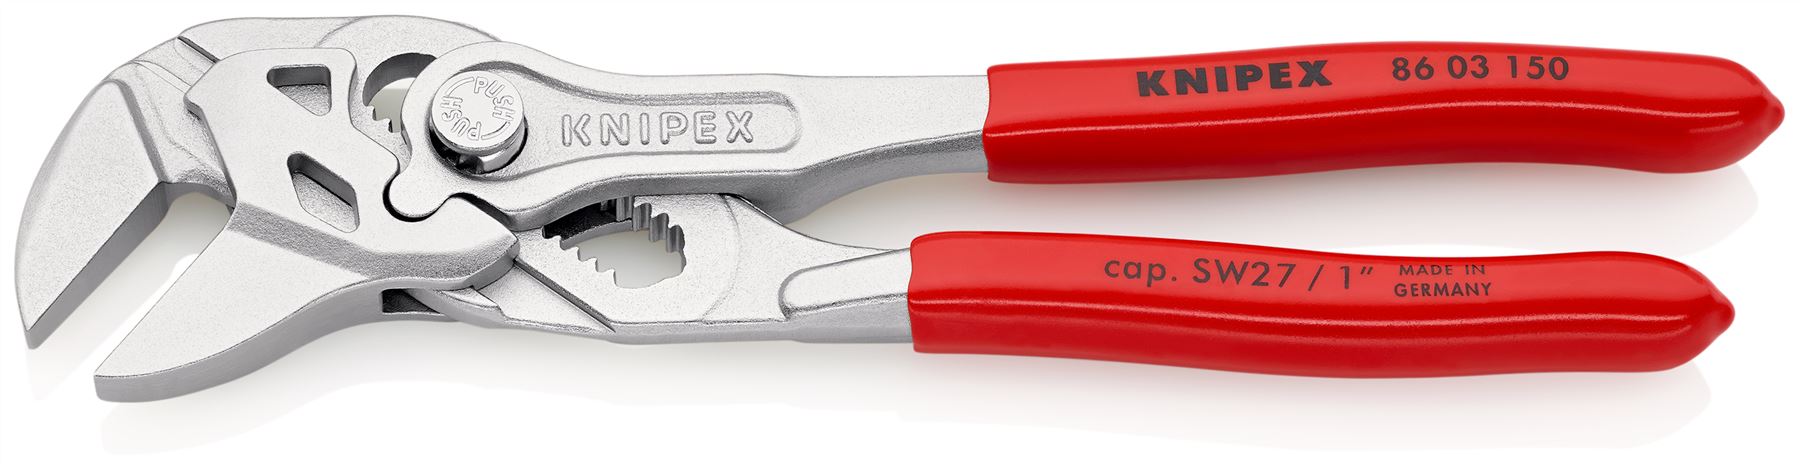 KNIPEX Pliers Wrench Slip Joint Plier 150mm Chrome Plastic Coated Handles 86 03 150 SB